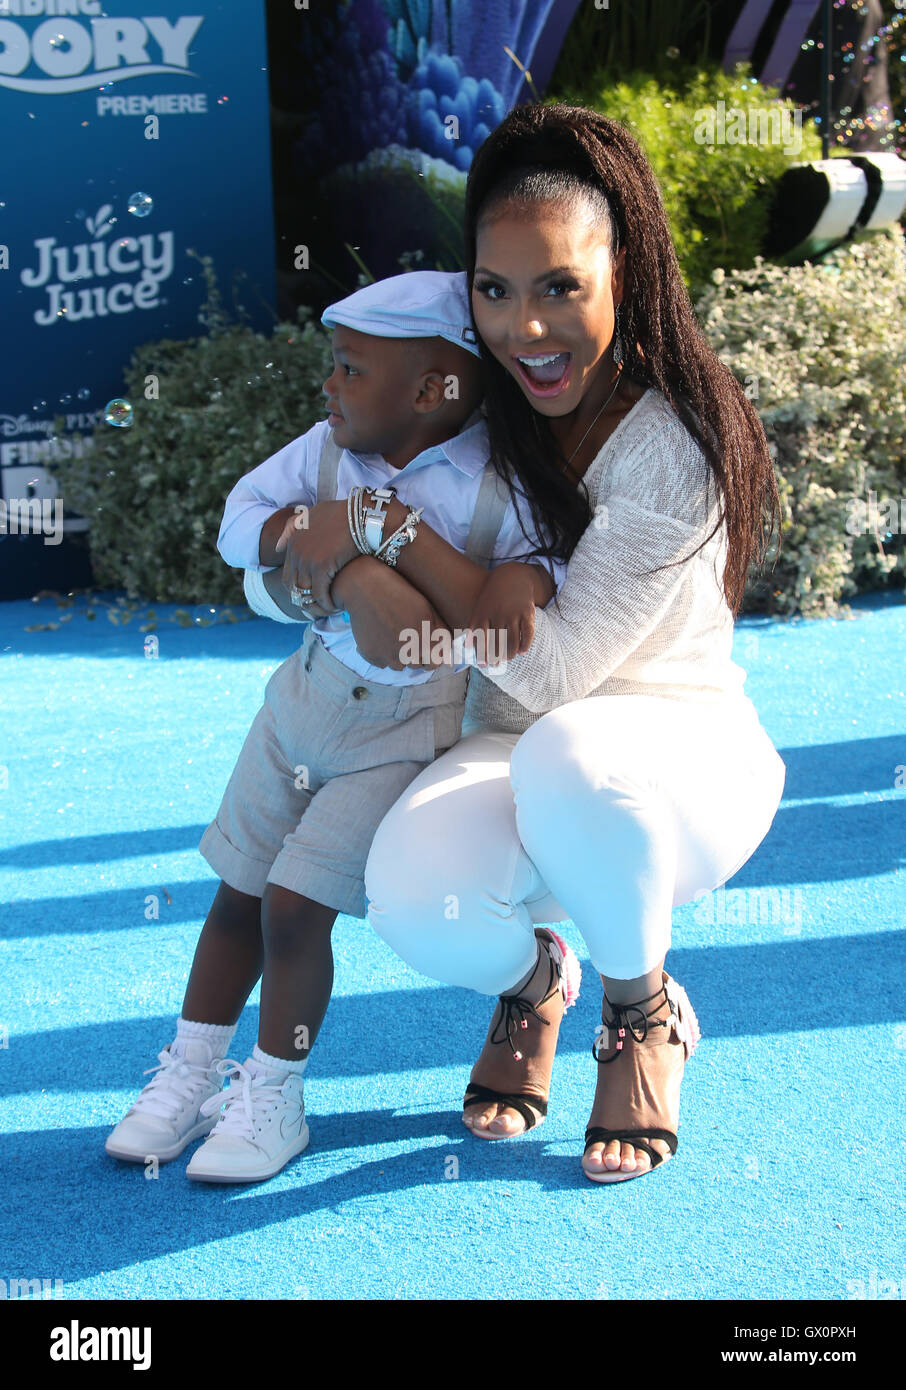 World premiere of Disney-Pixar's 'Finding Dory' at the El Capitan Theatre - Arrivals  Featuring: Tamar Braxton, Logan Vincent Herbert Where: Hollywood, California, United States When: 08 Jun 2016 Stock Photo